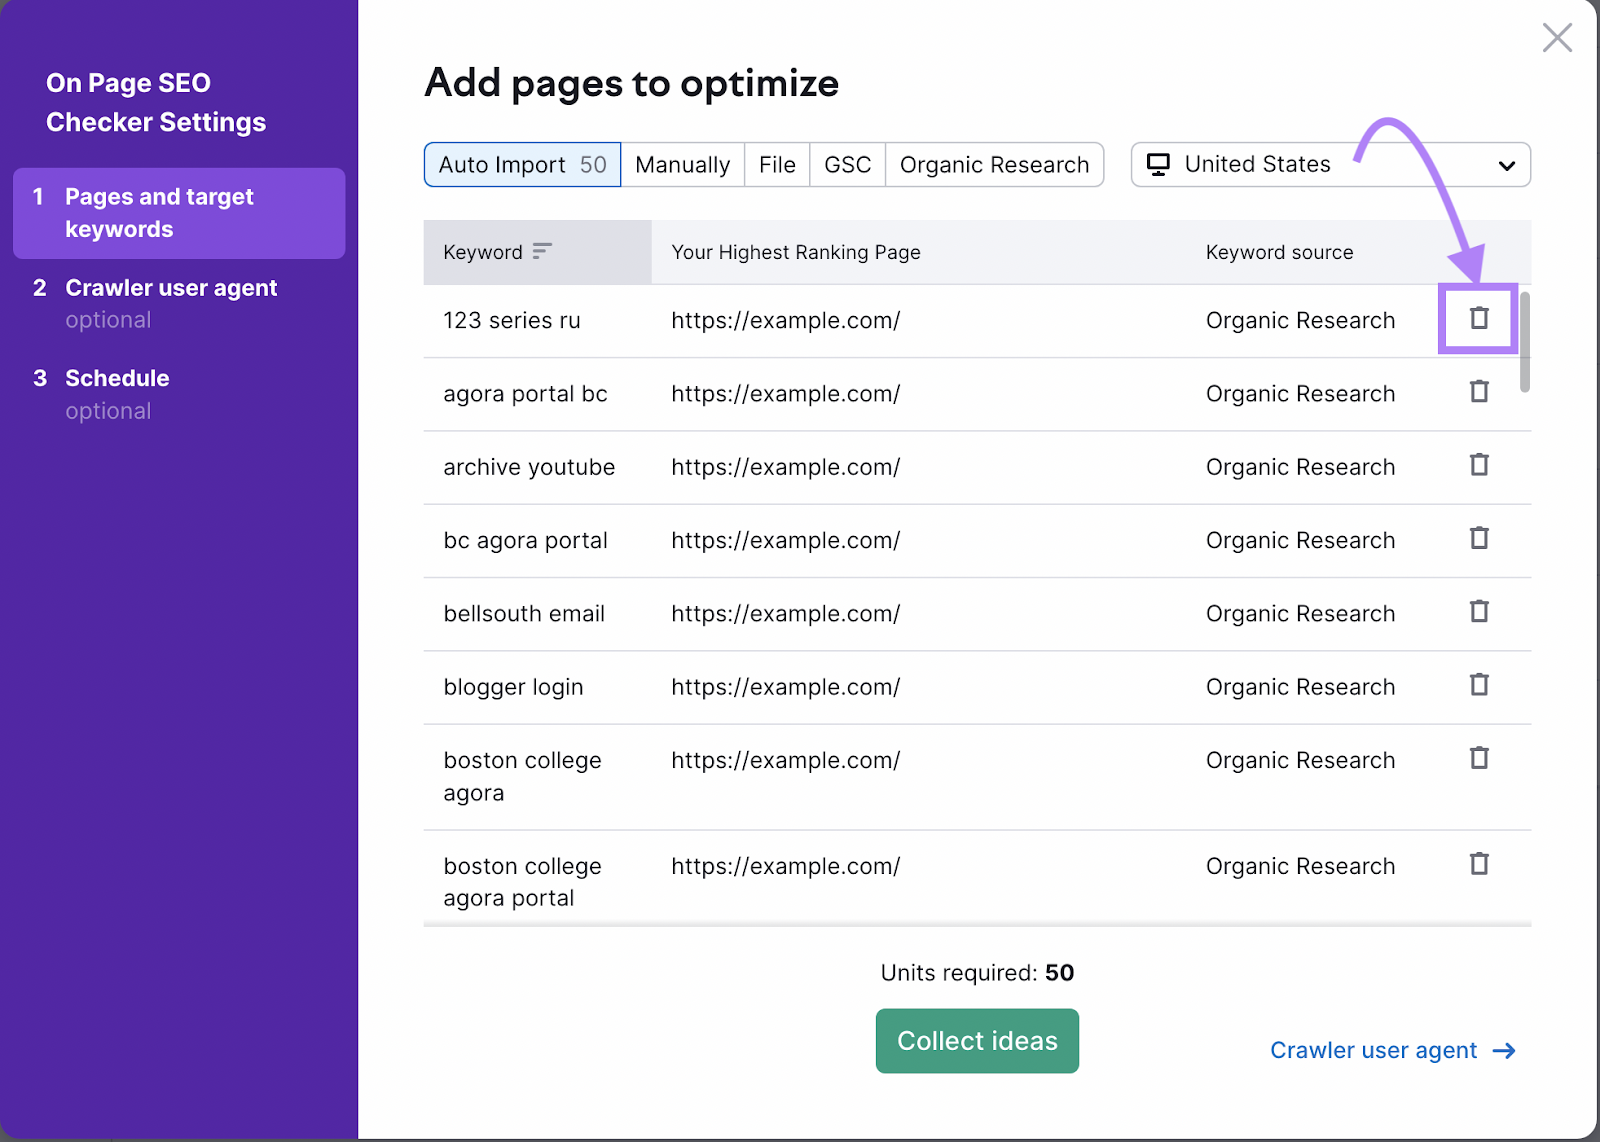 “Add pages to optimize” screen with "Auto import" option chosen